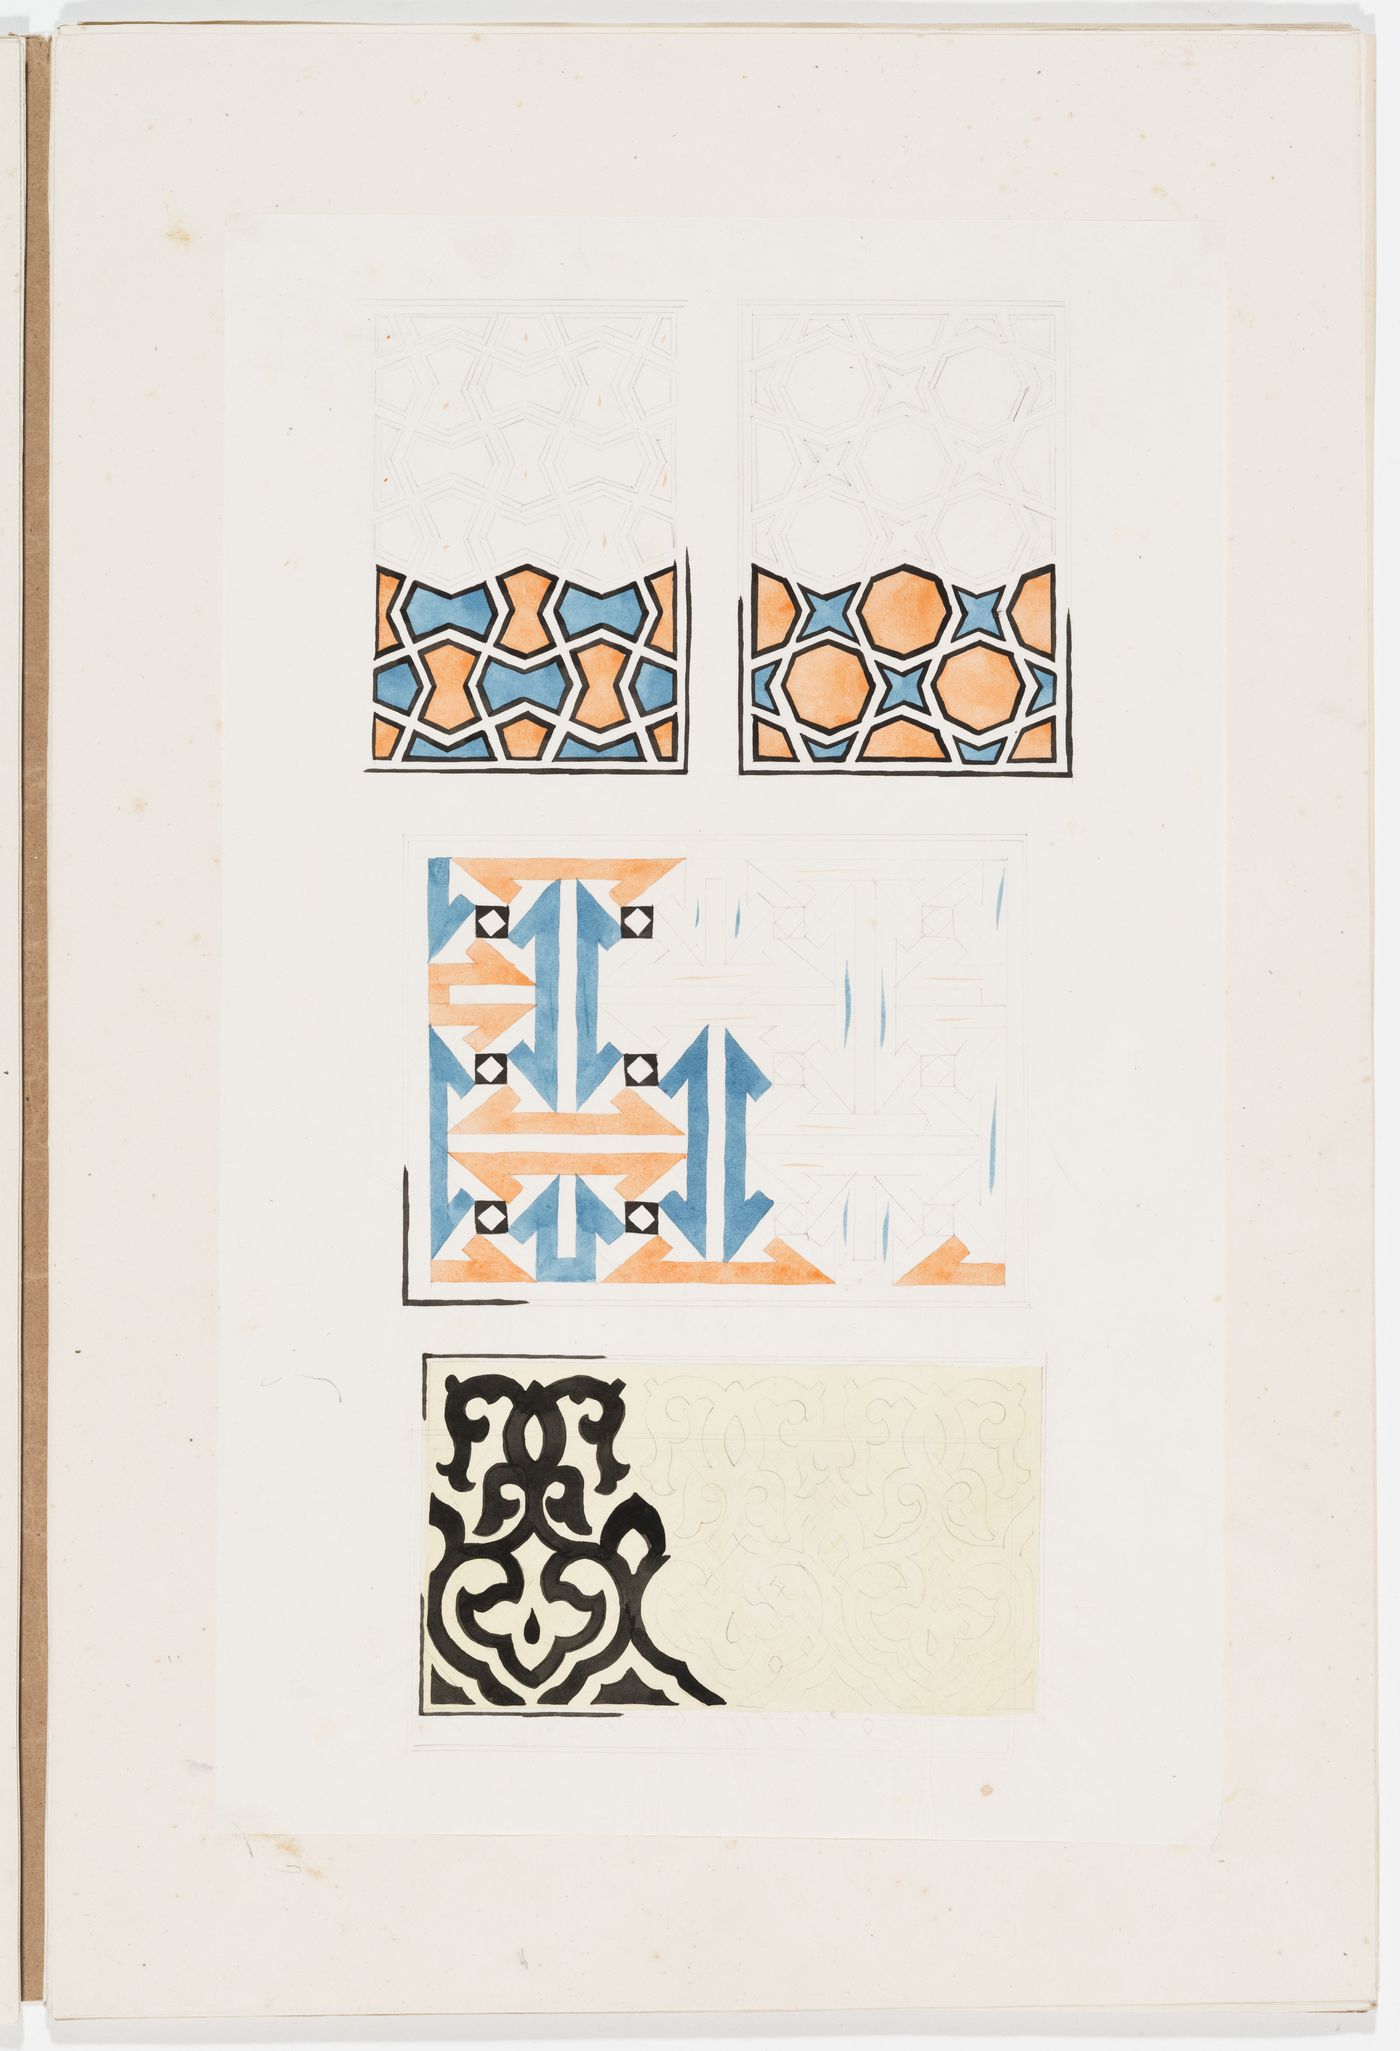 Ornament drawing of three panels decorated with interlocking geometric shapes and a panel decorated with foliage